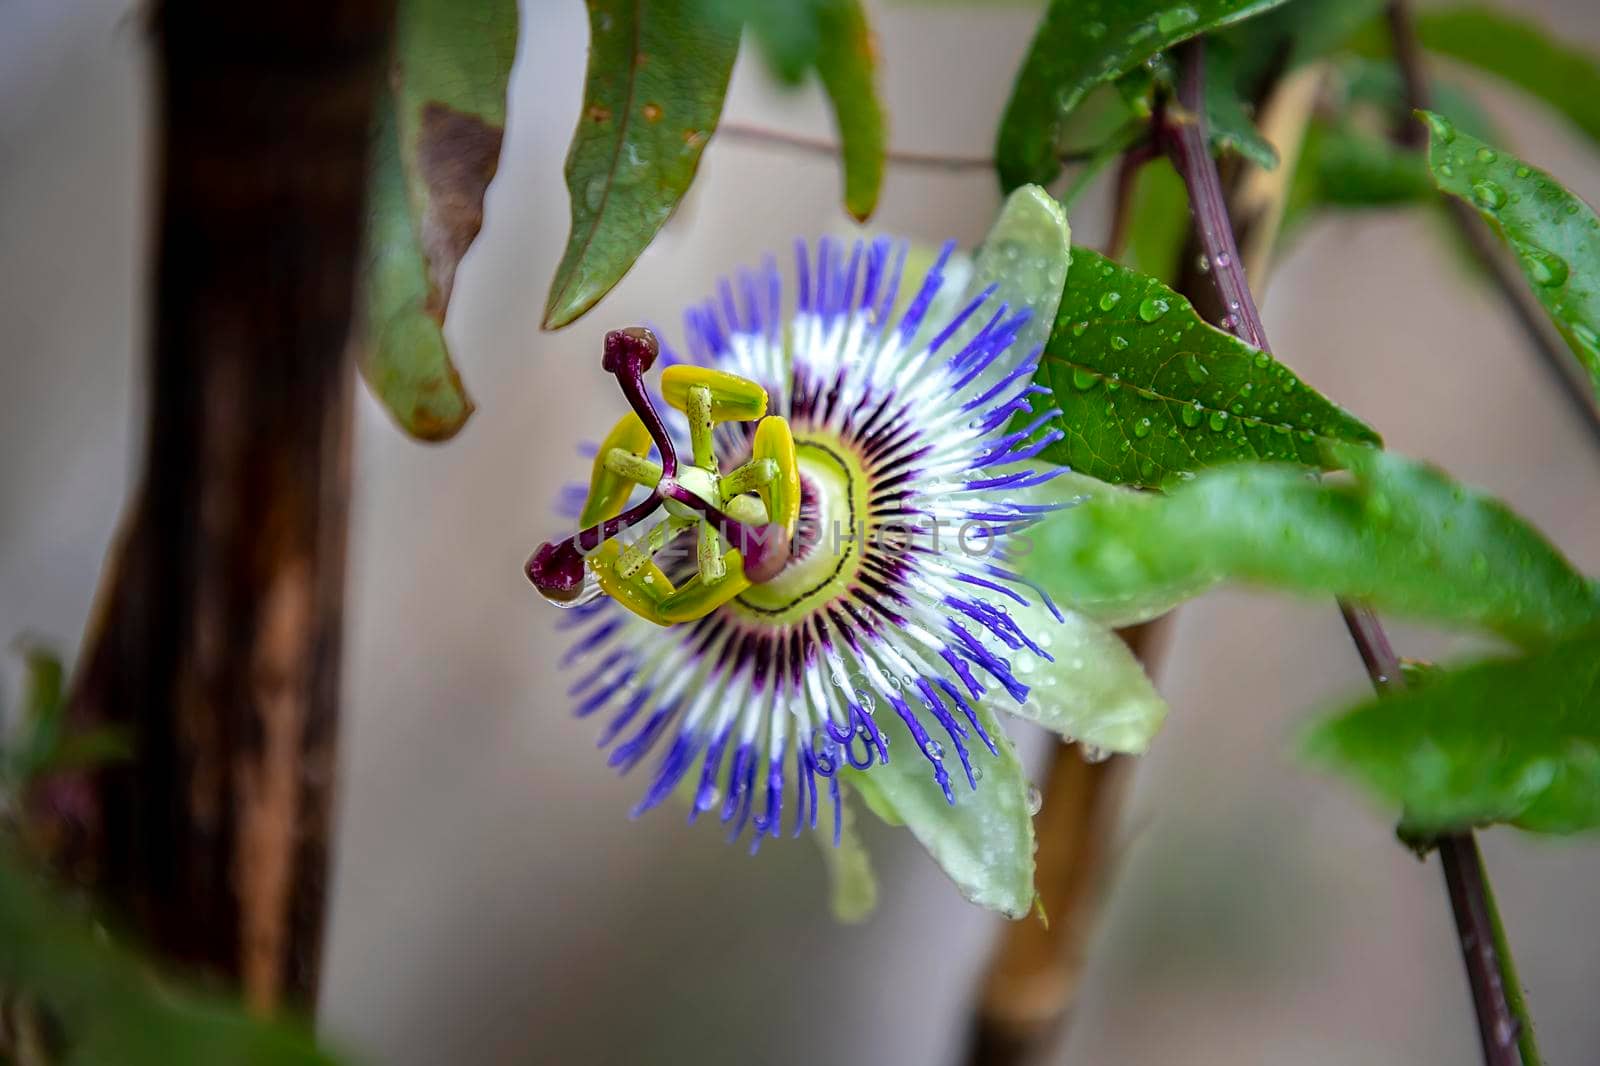 A close up of the passion flower after rain, a special flower that blooms for a few days. Passiflora by EdVal